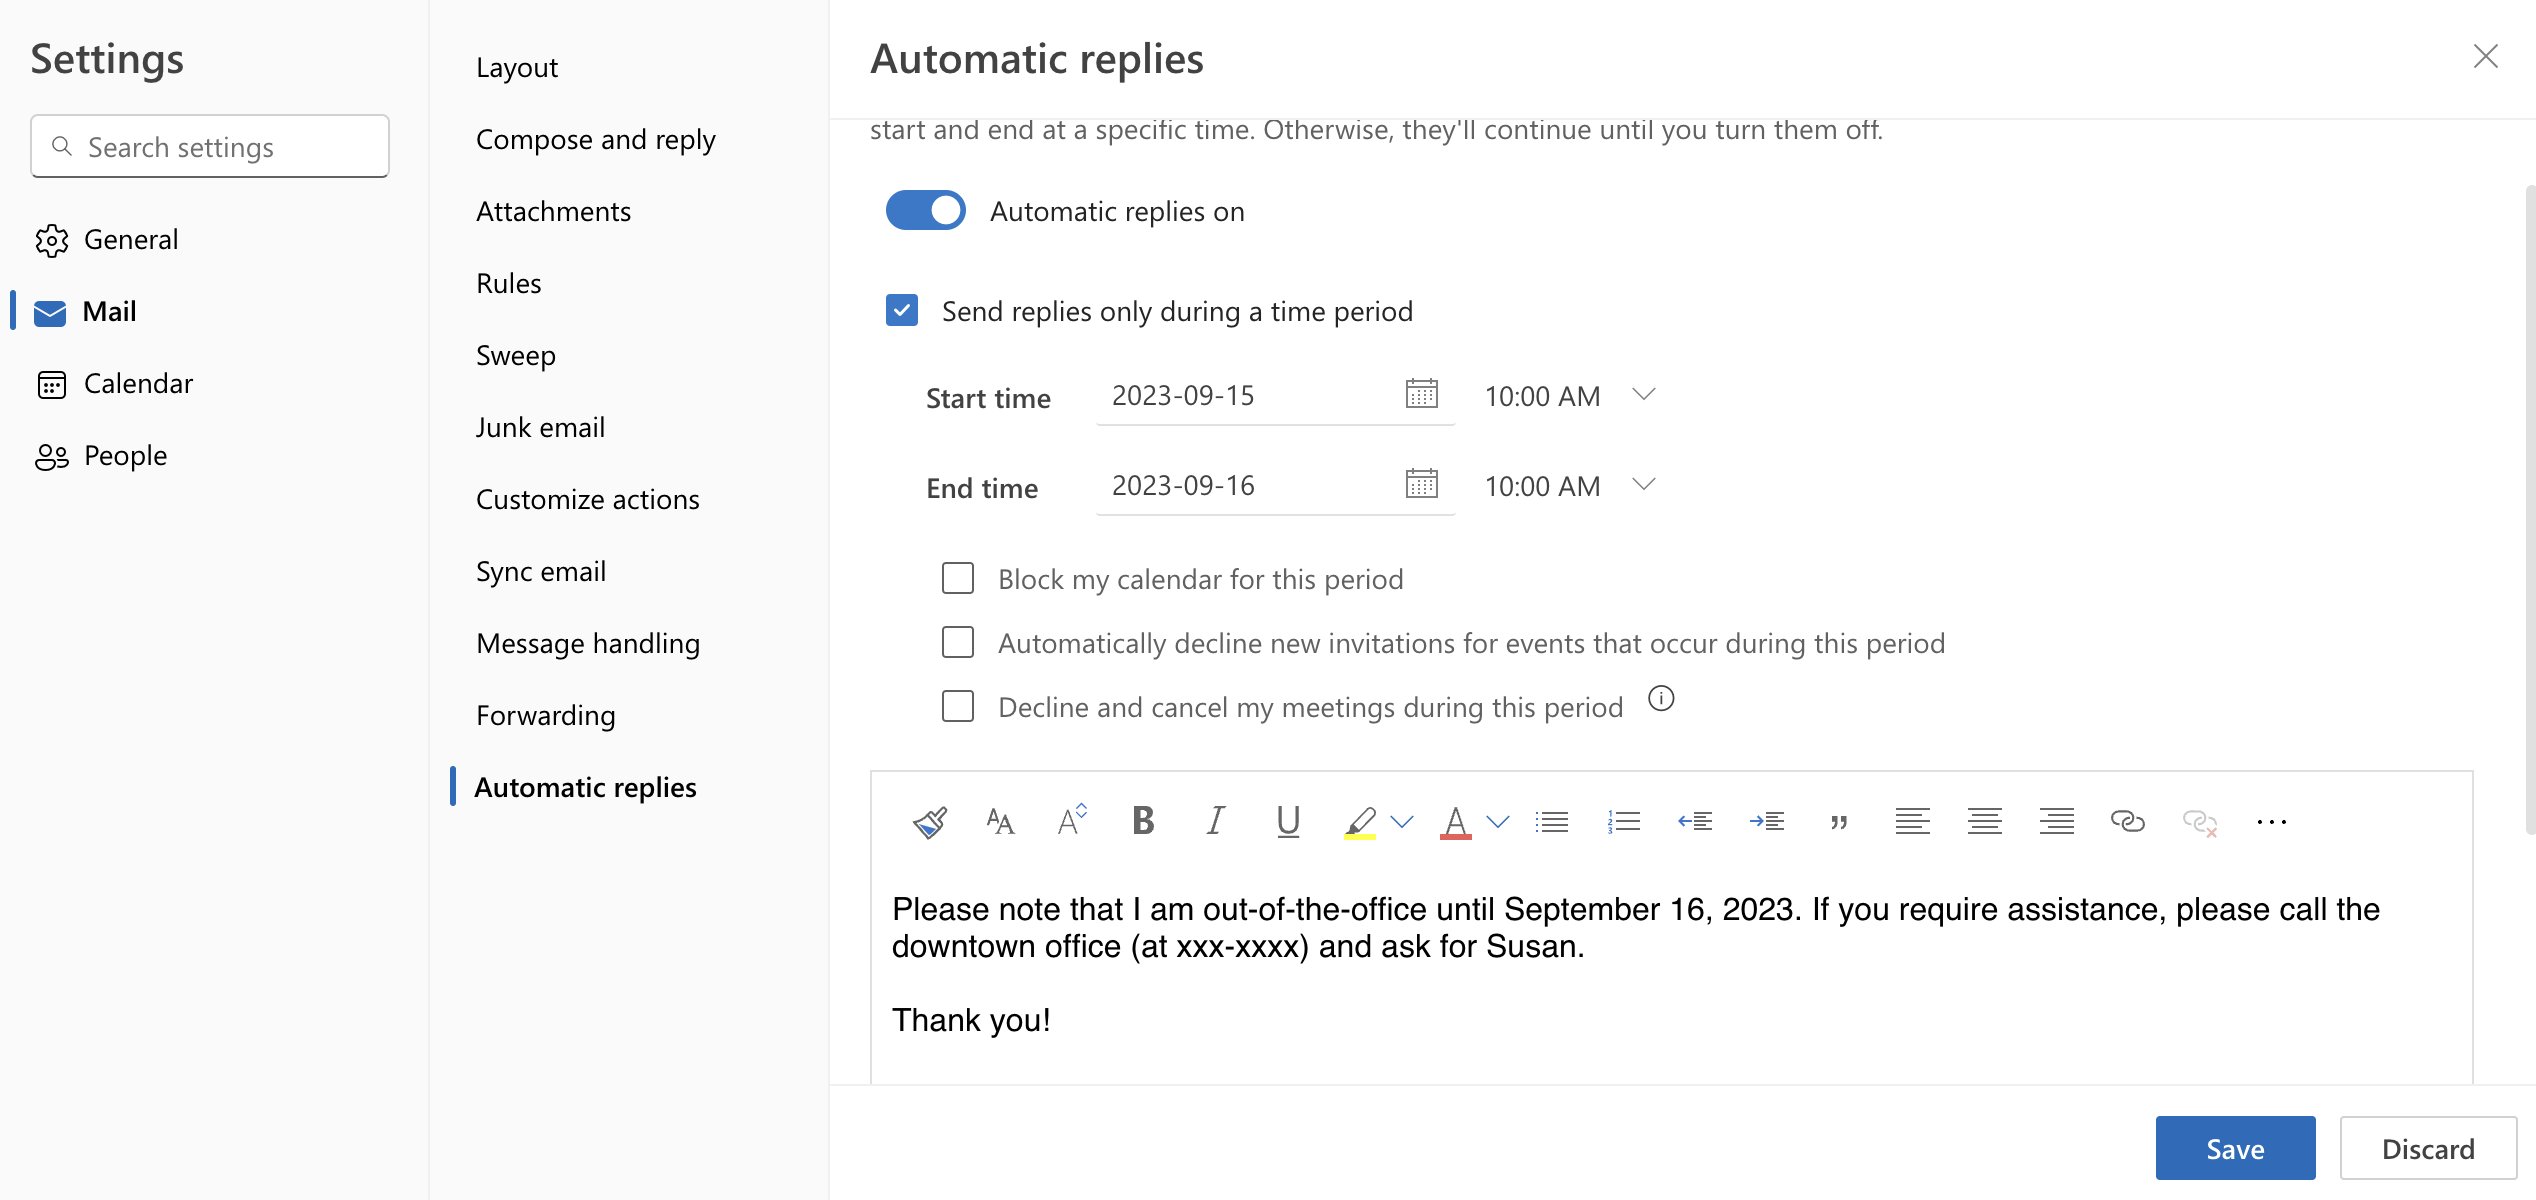 Screenshot of the option to specify different replies for email senders that are internal and external to your organization. You can do so by clicking the “Send replies outside your organization” box.